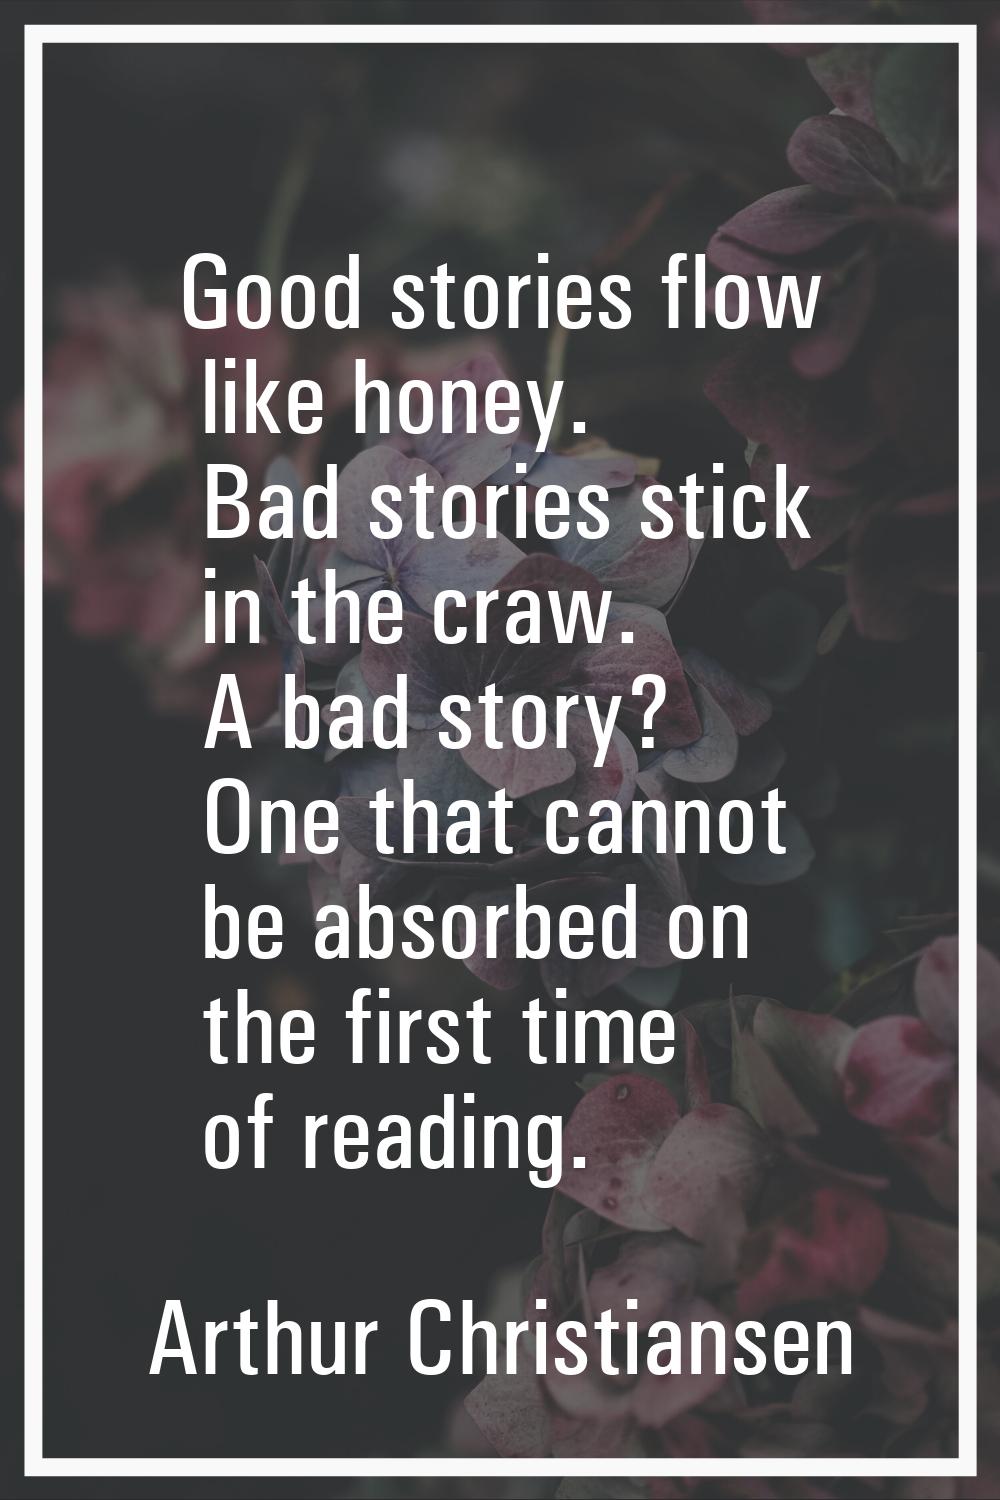 Good stories flow like honey. Bad stories stick in the craw. A bad story? One that cannot be absorb